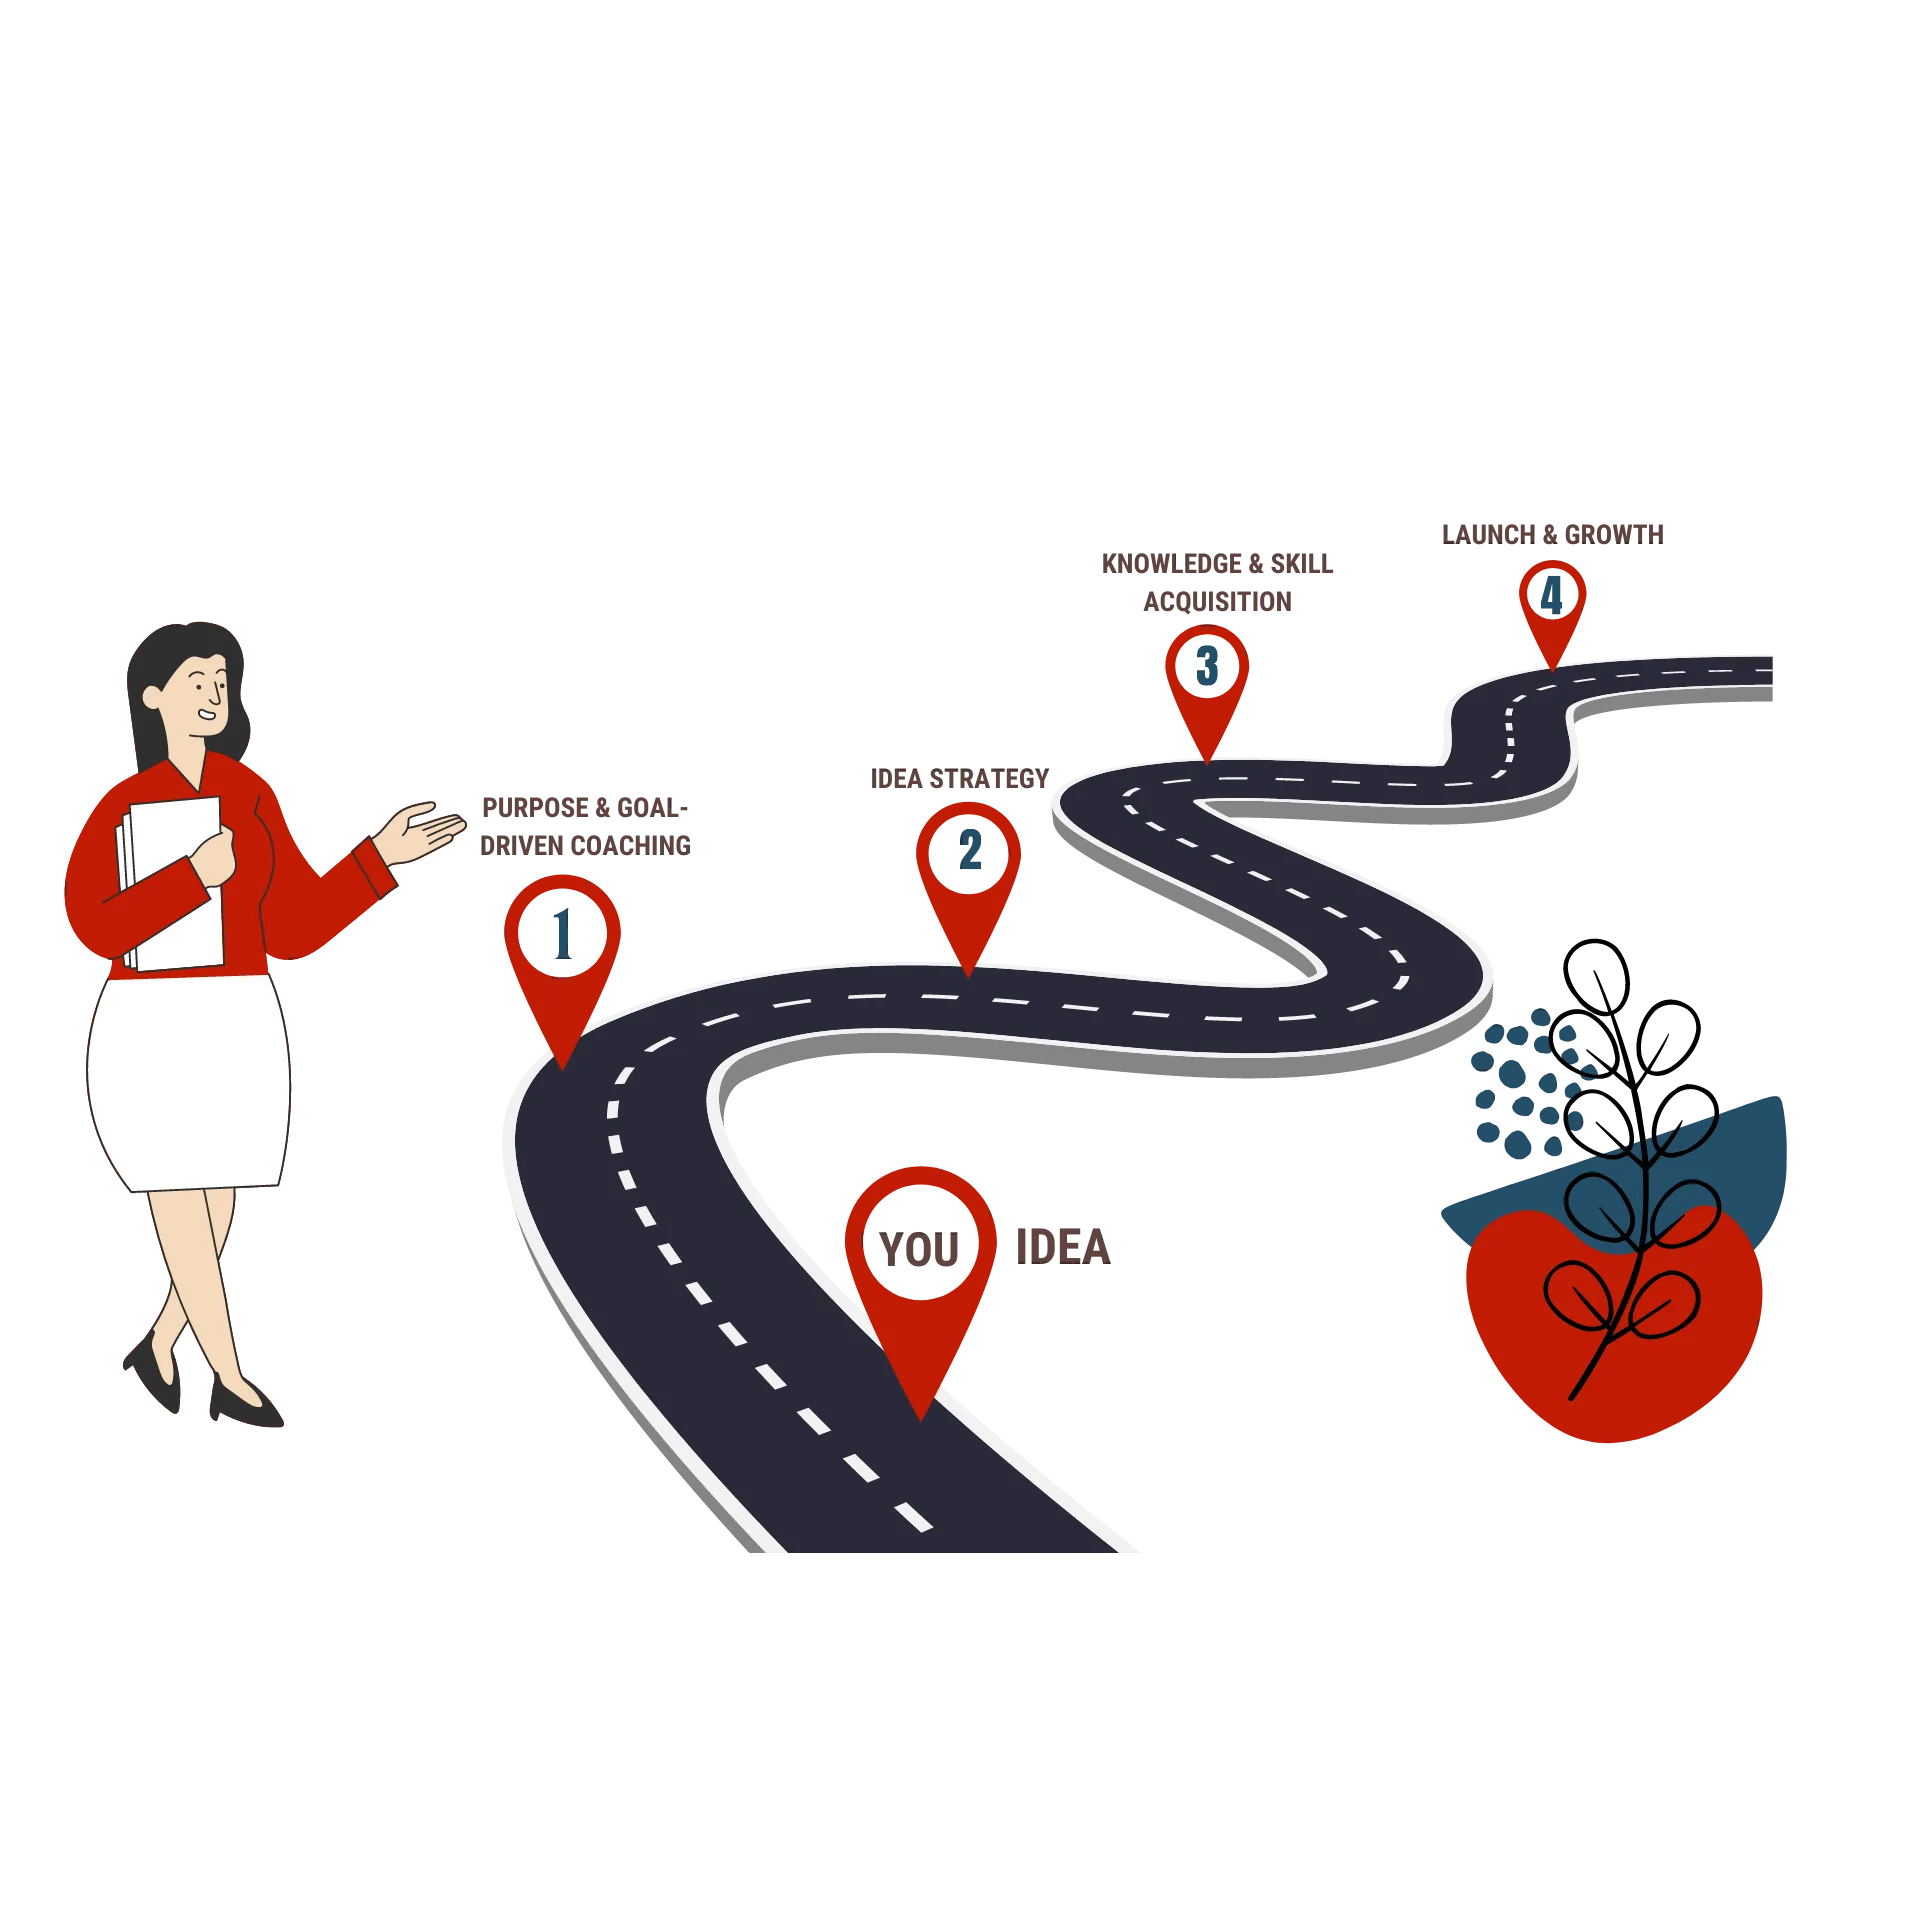 An infographic explaining the entrepreneurial journey with a woman holding a sign and a road with four milestones.